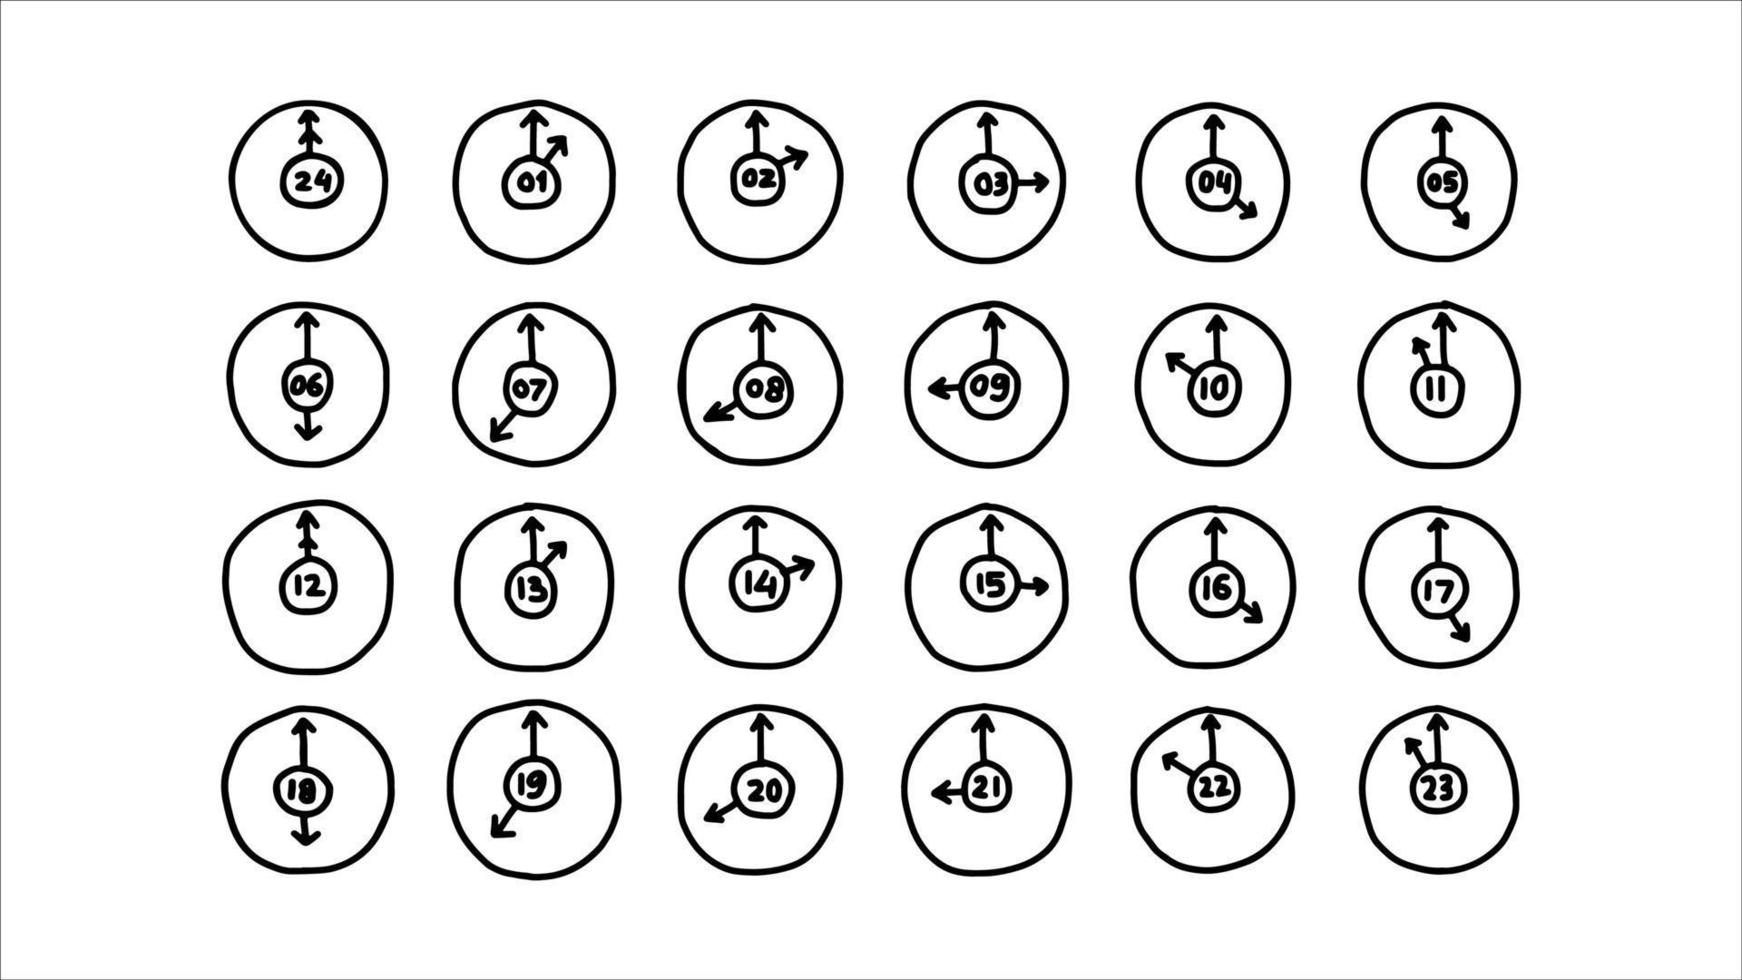 graphic vector of clock icon design with various time and using hand drawing style